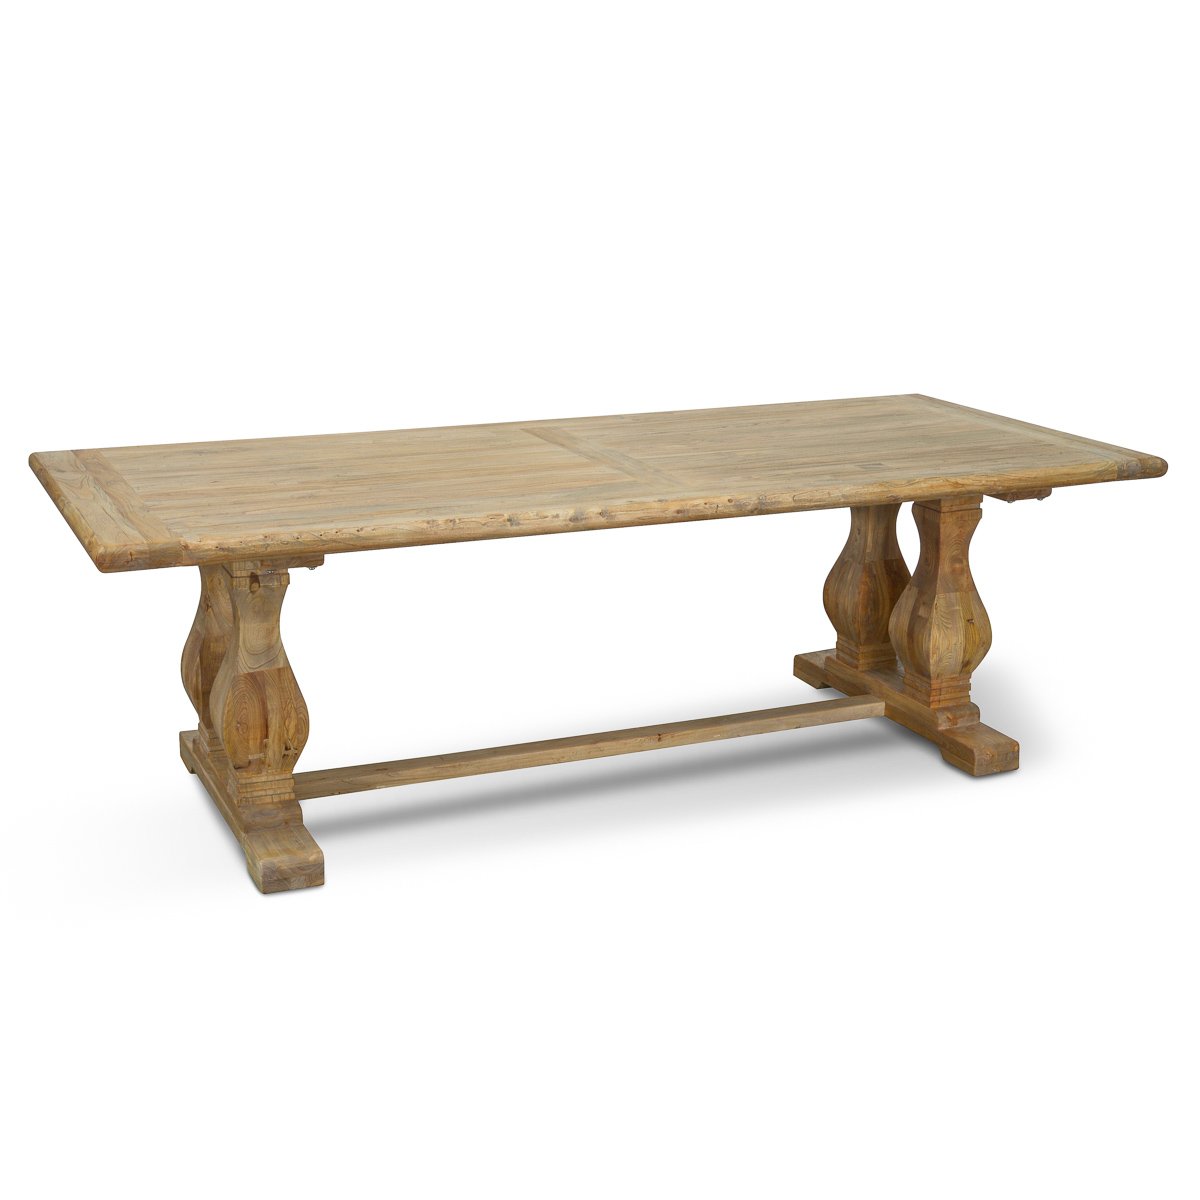 Lima Oak Wood Dining Table 2.4m - Rustic Natural - Dining Tables